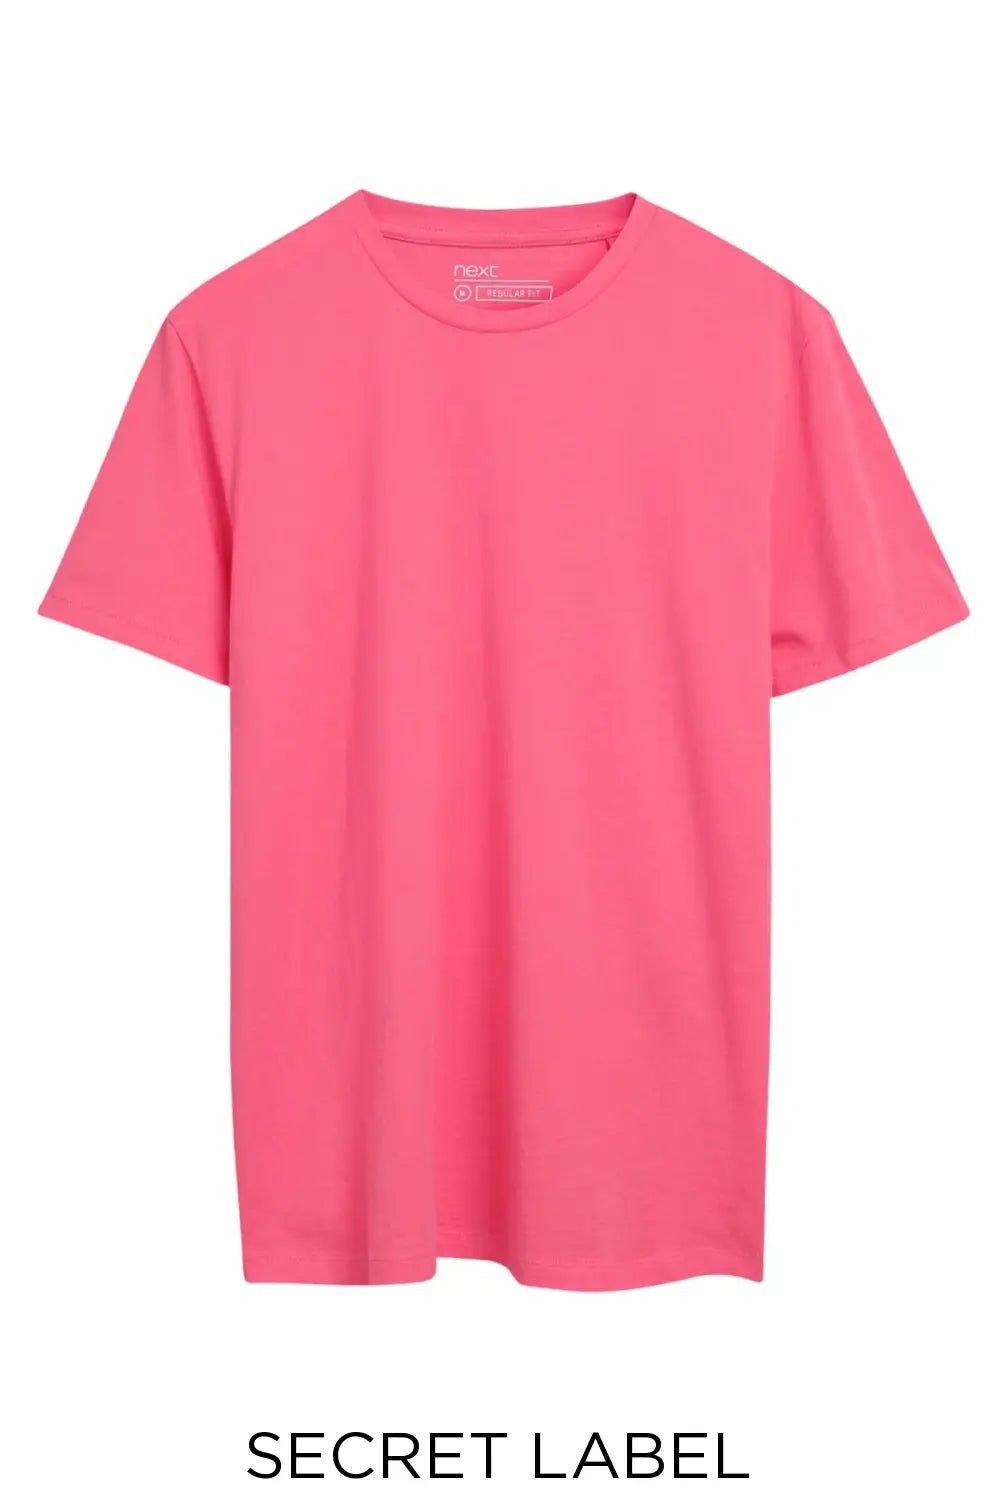 Secret Label Relaxed Fit T Shirt Pink / 3XL